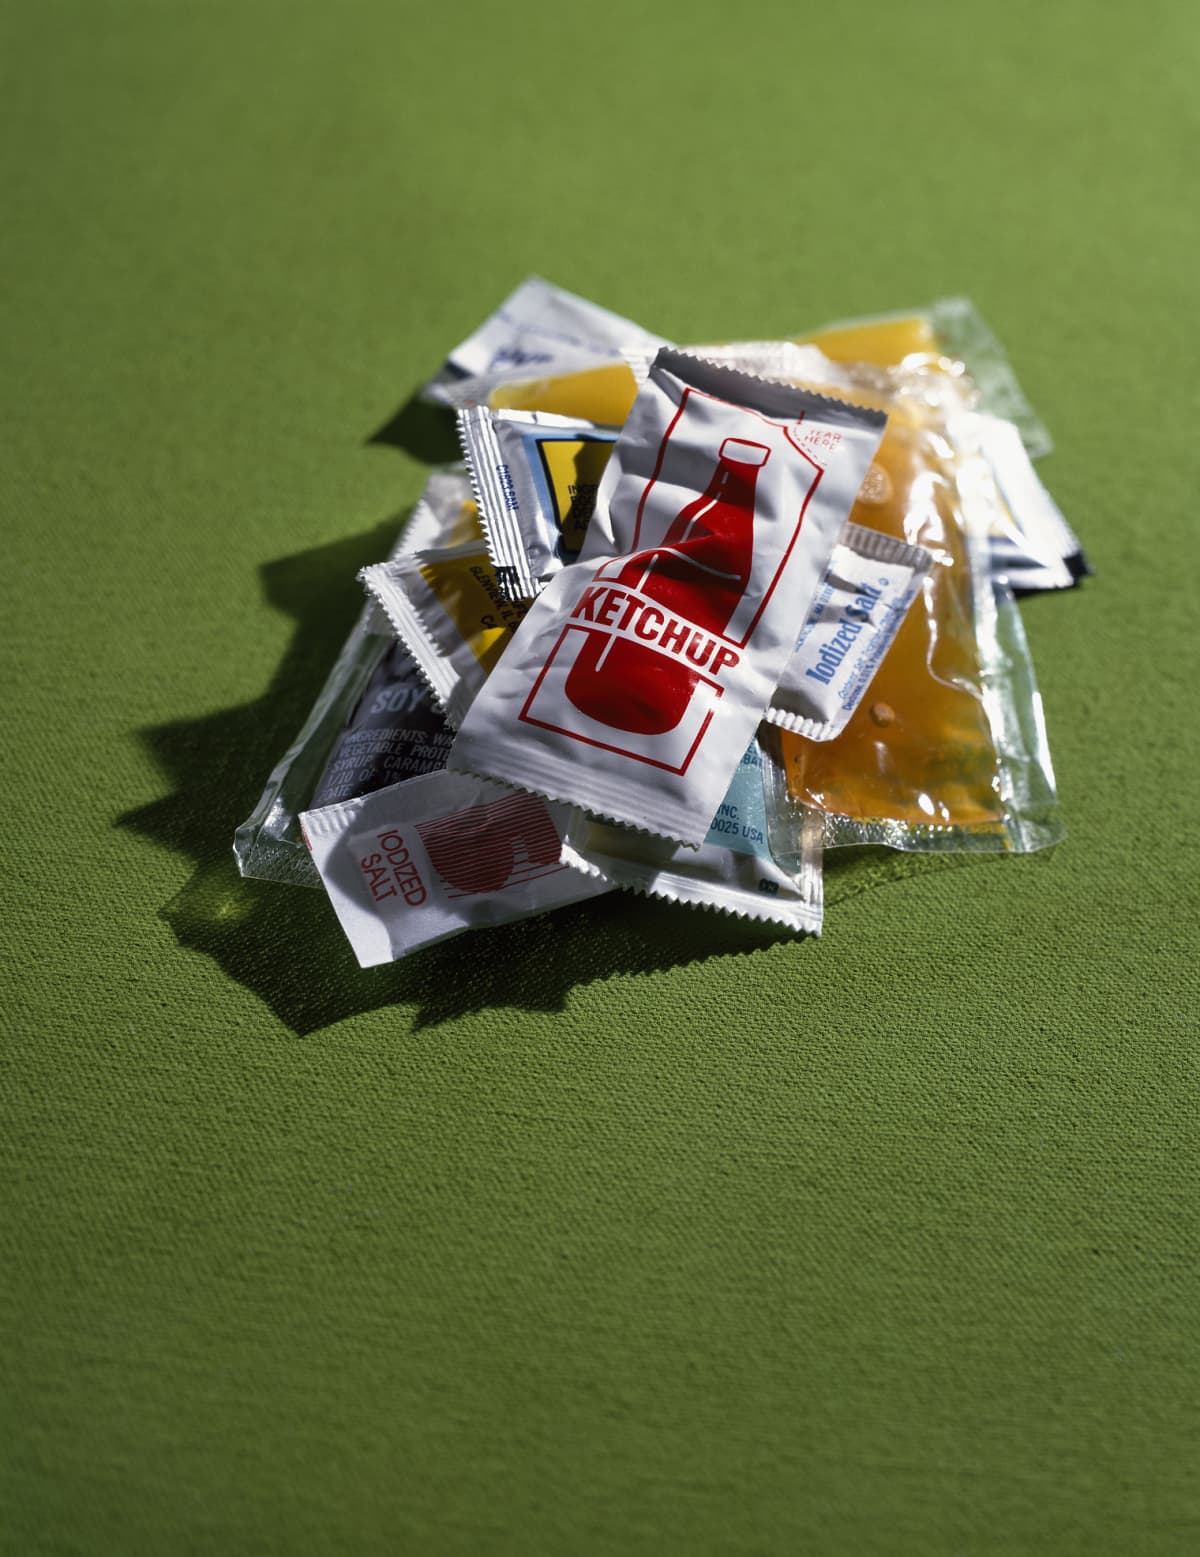 Sauce packets against a green background.